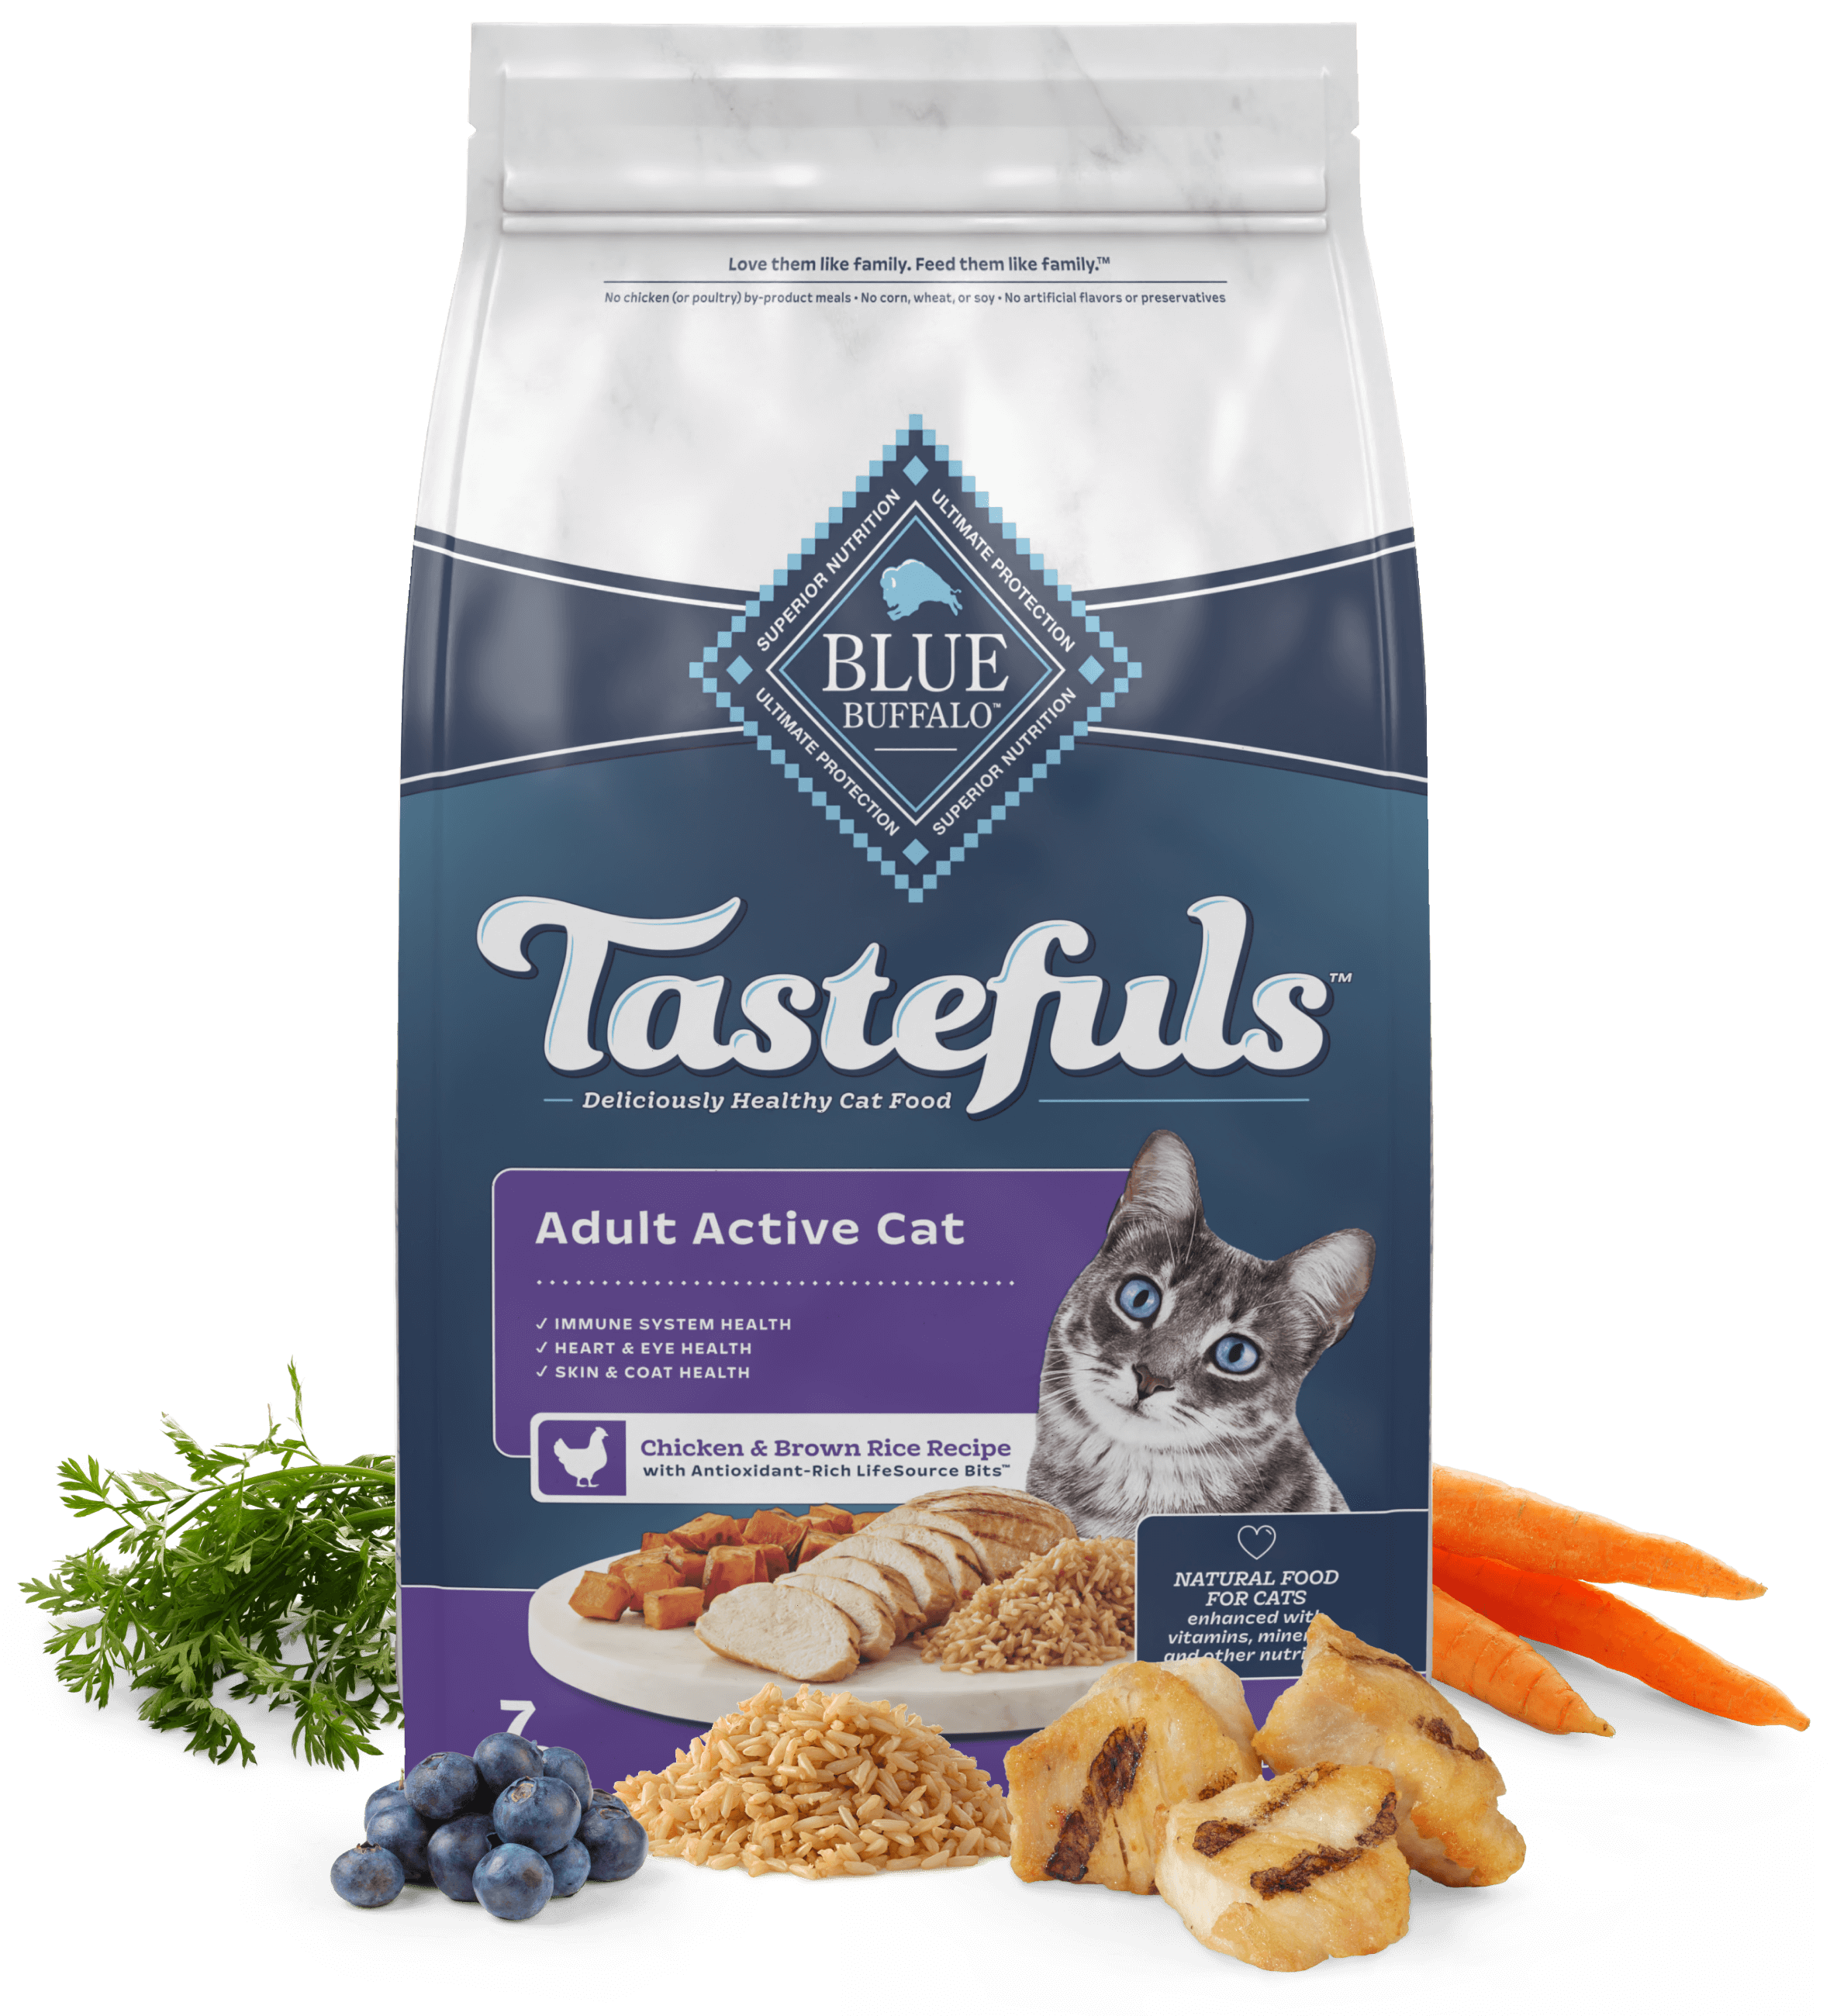 A bag of Blue Buffalo Tastefuls cat food, Adult Active Chicken & Brown Rice Recipe, with images of fresh ingredients like carrots, greens, and chicken pieces in the foreground.